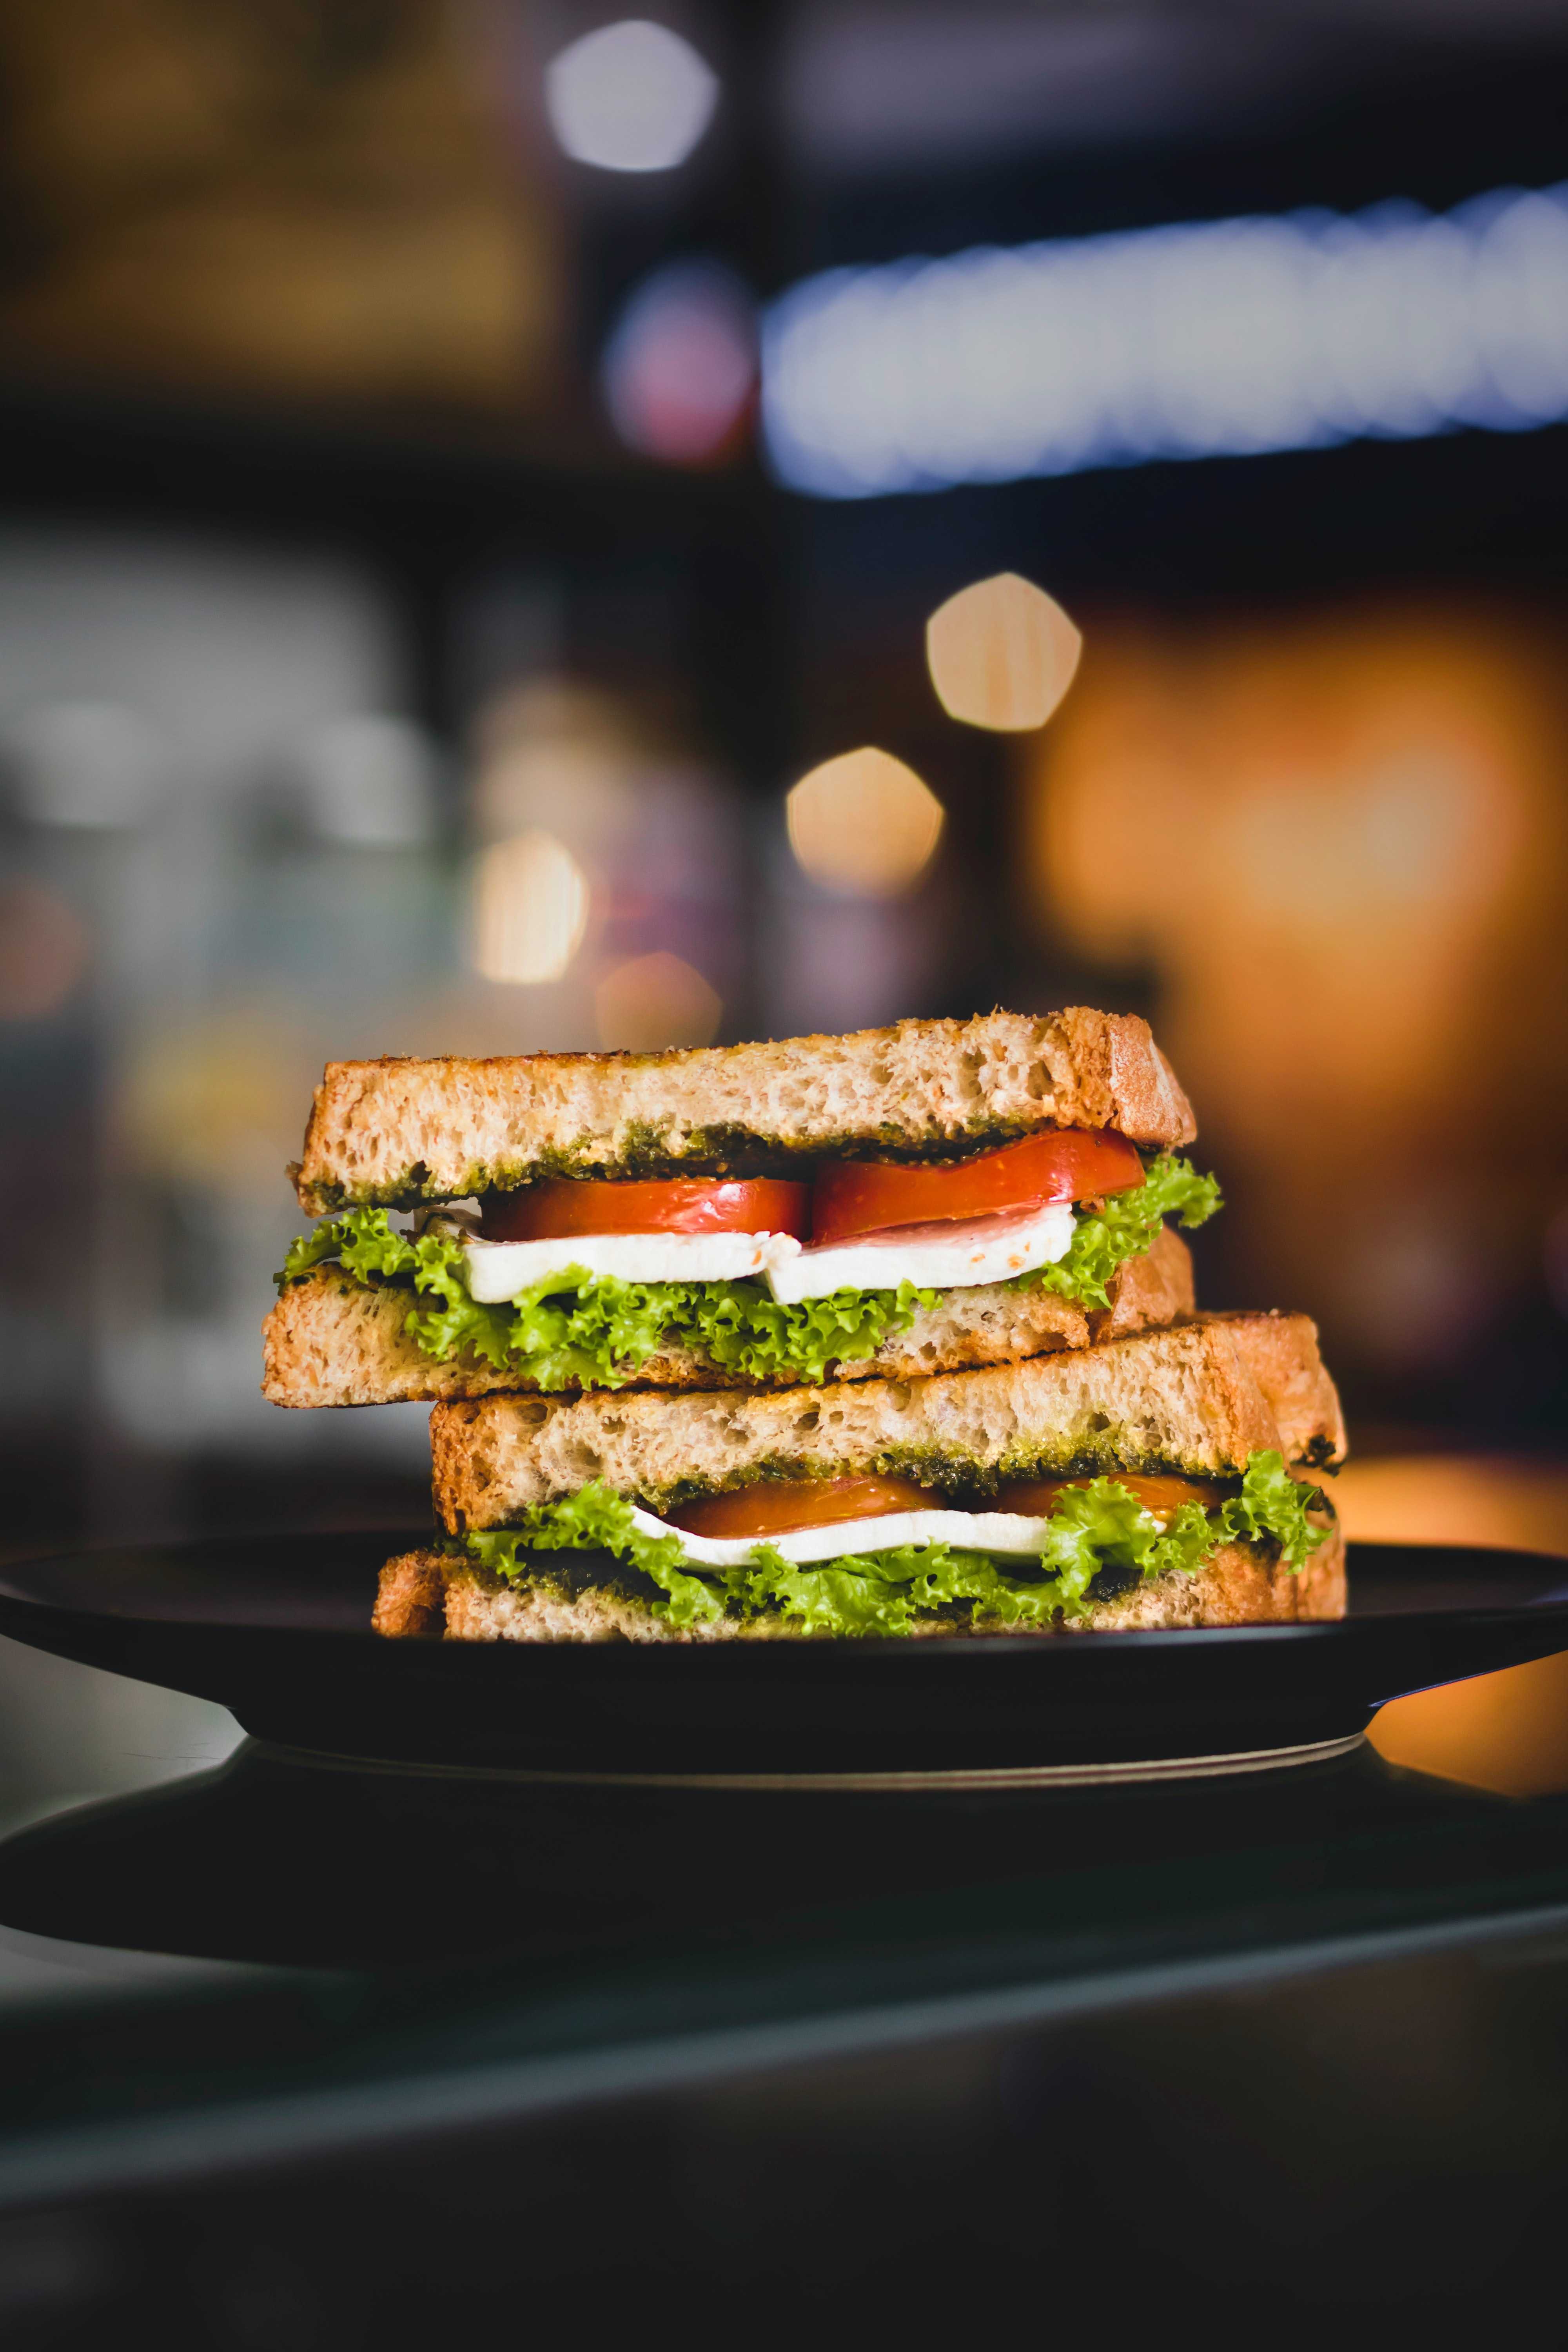 Two sandwiches stacked on a black plate with a blurred background